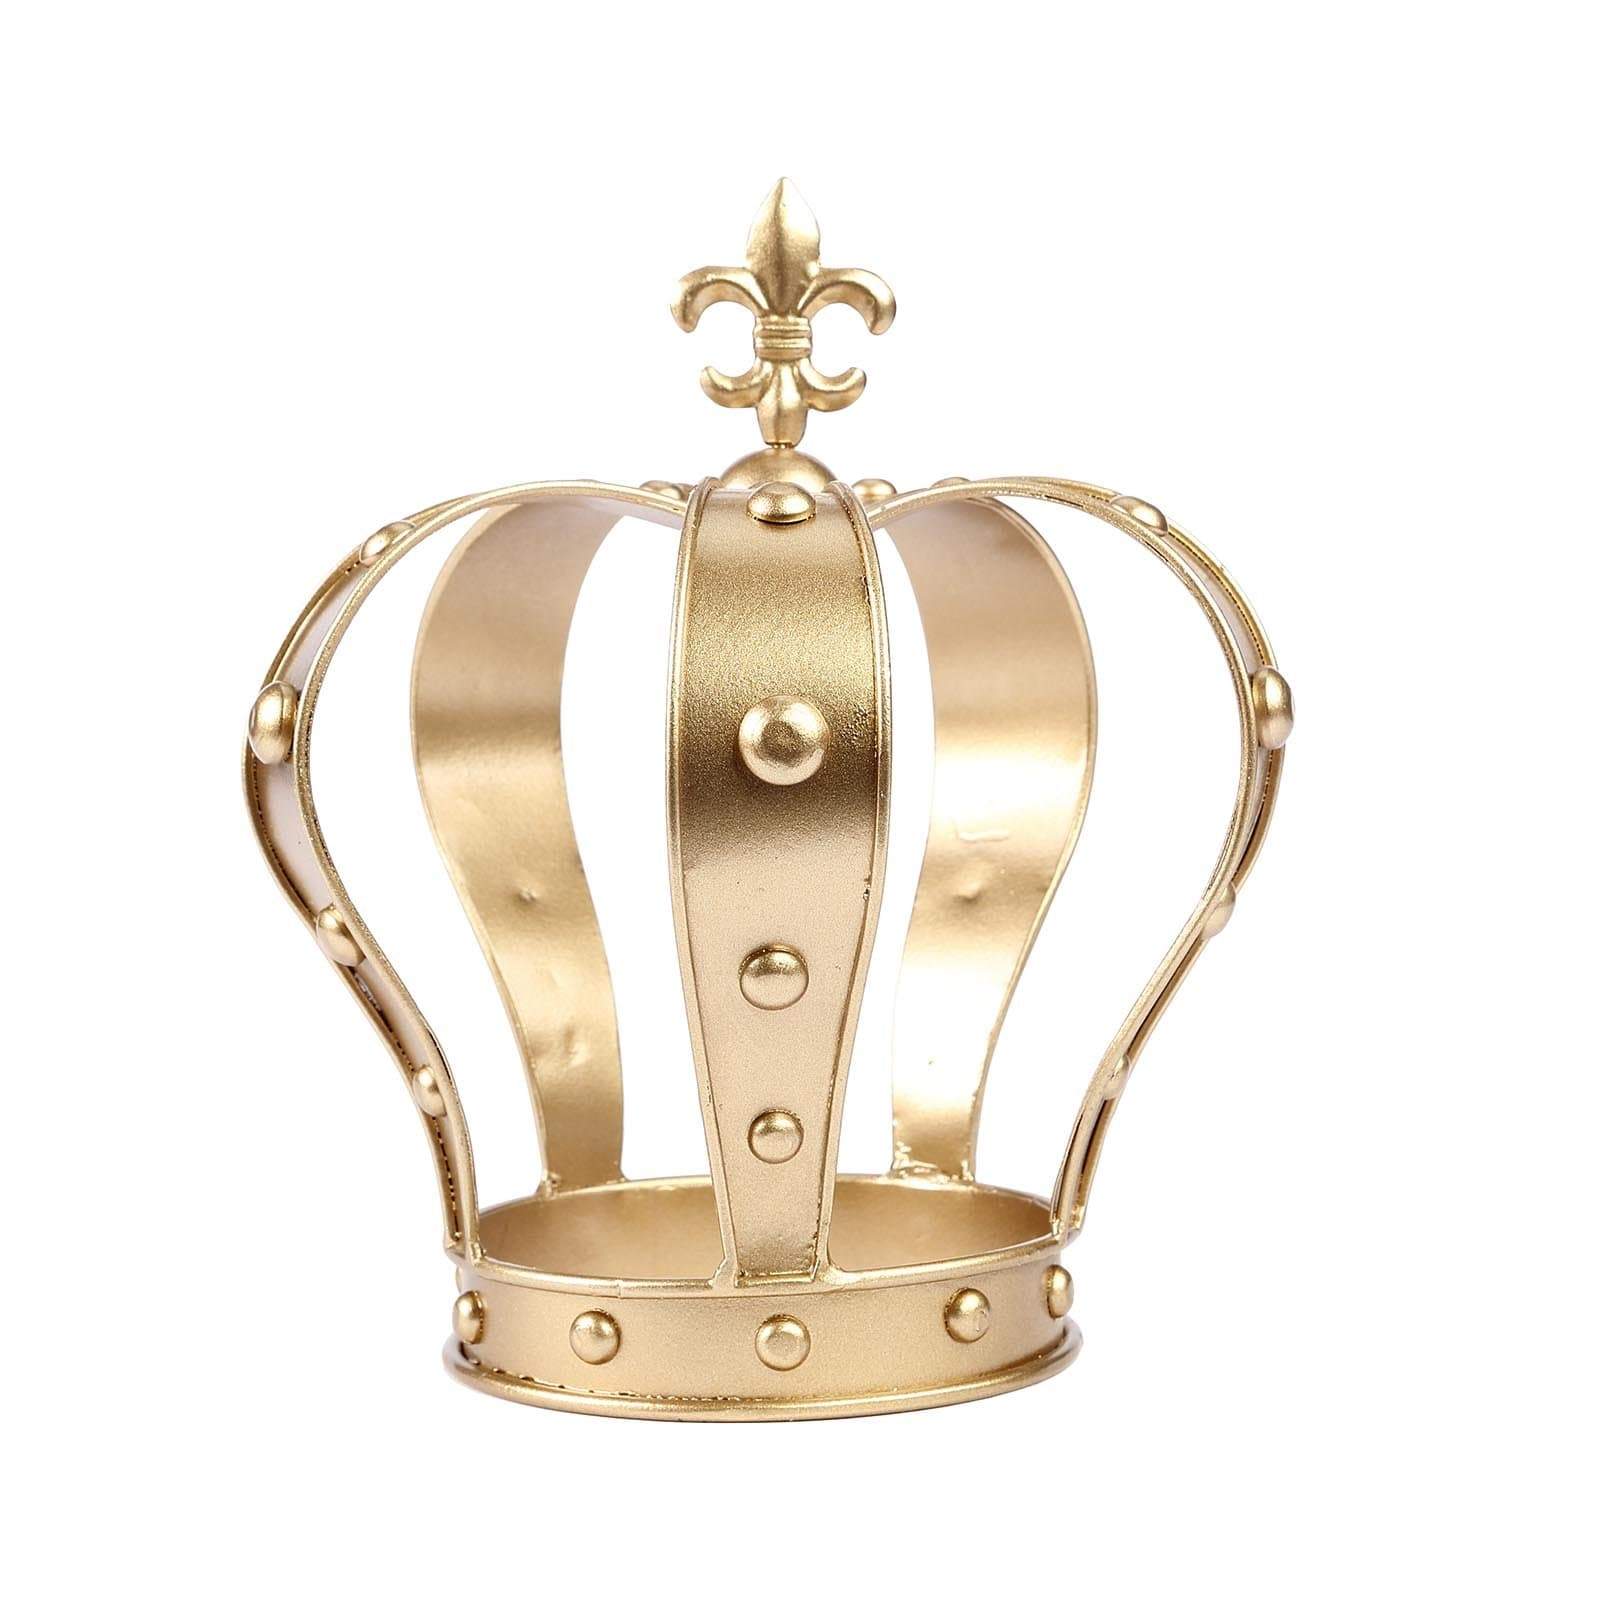 8 in tall Gold Metal Crown Fleur-de-lis Cake Topper Kids Birthday Party Decorations